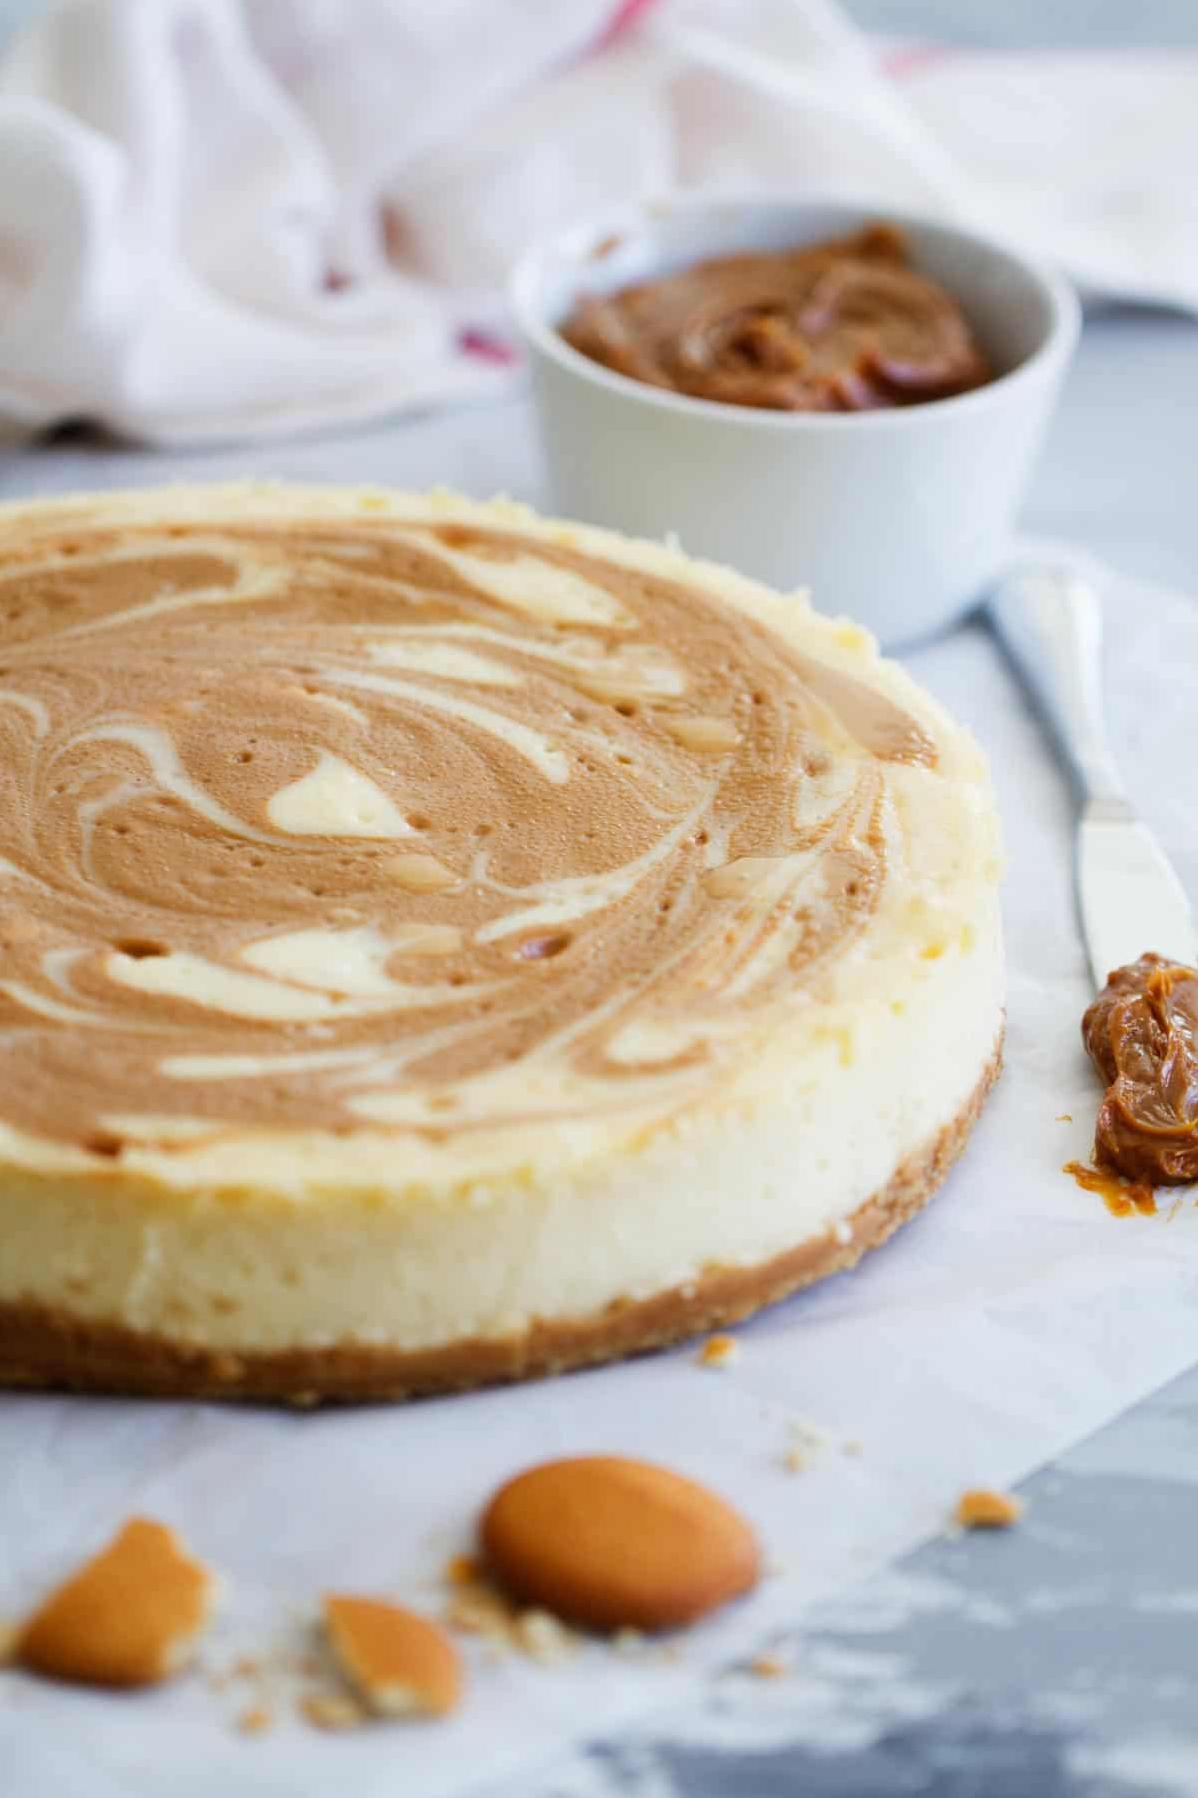  One bite of this cheesecake and you won't be able to resist another